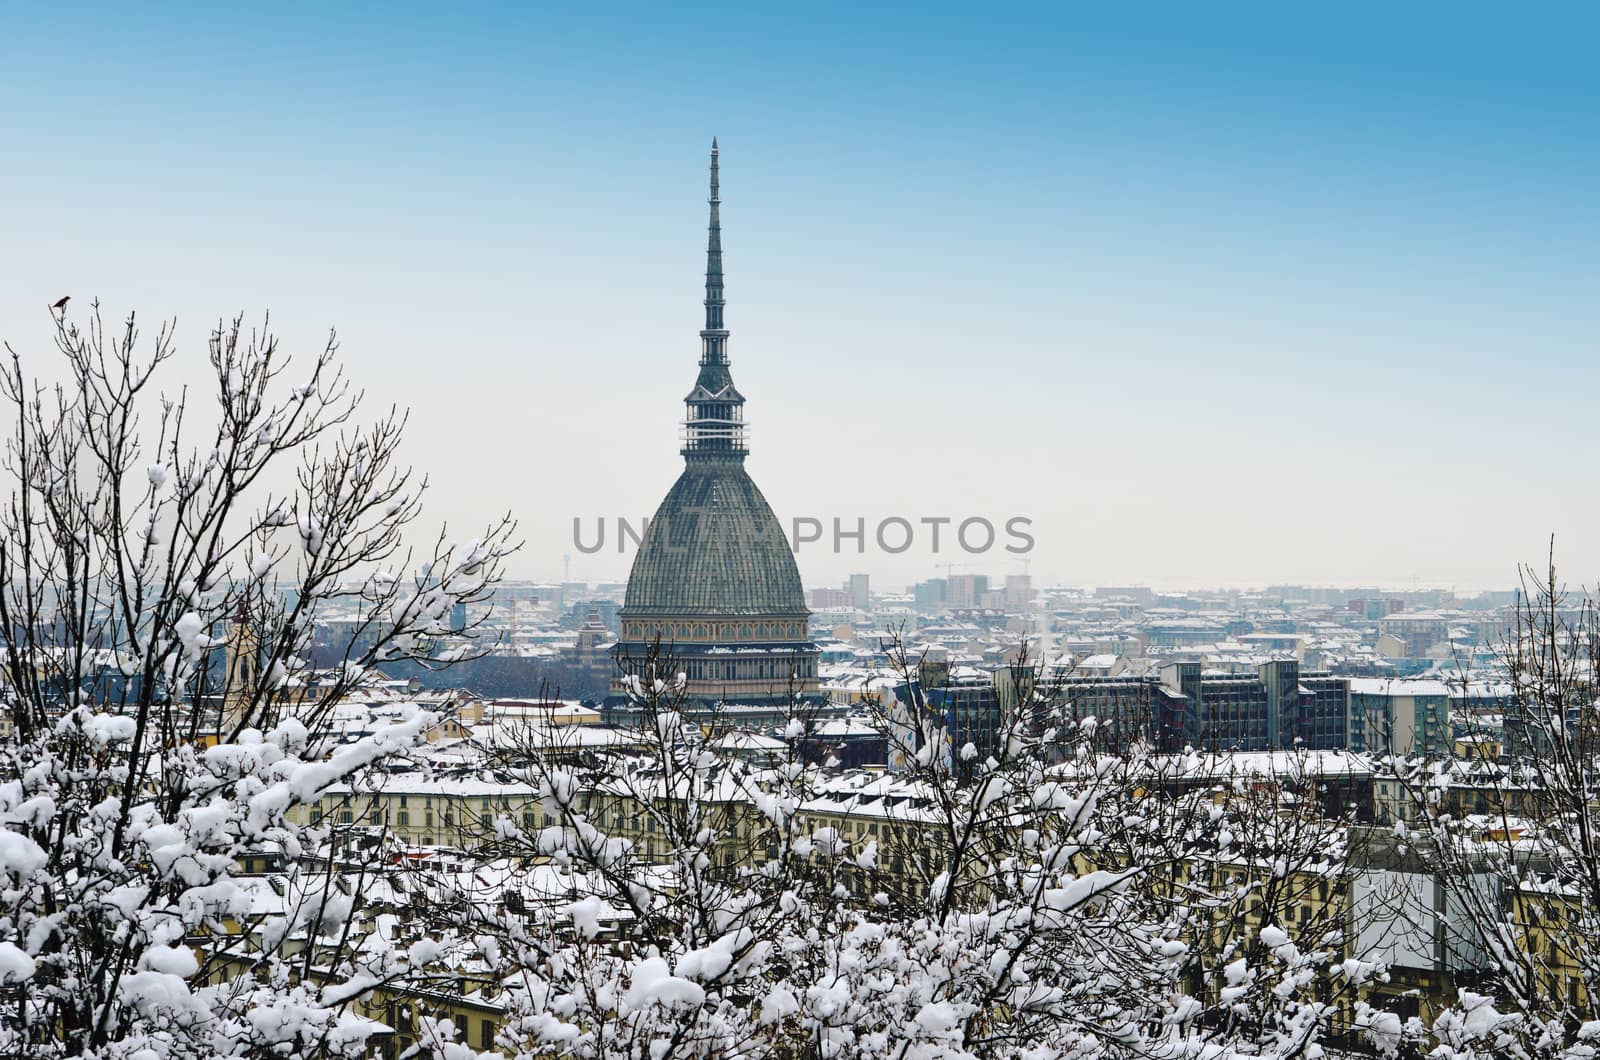 Turin, Italy, in winter. Snow covered roofs and Mole Antonelliana